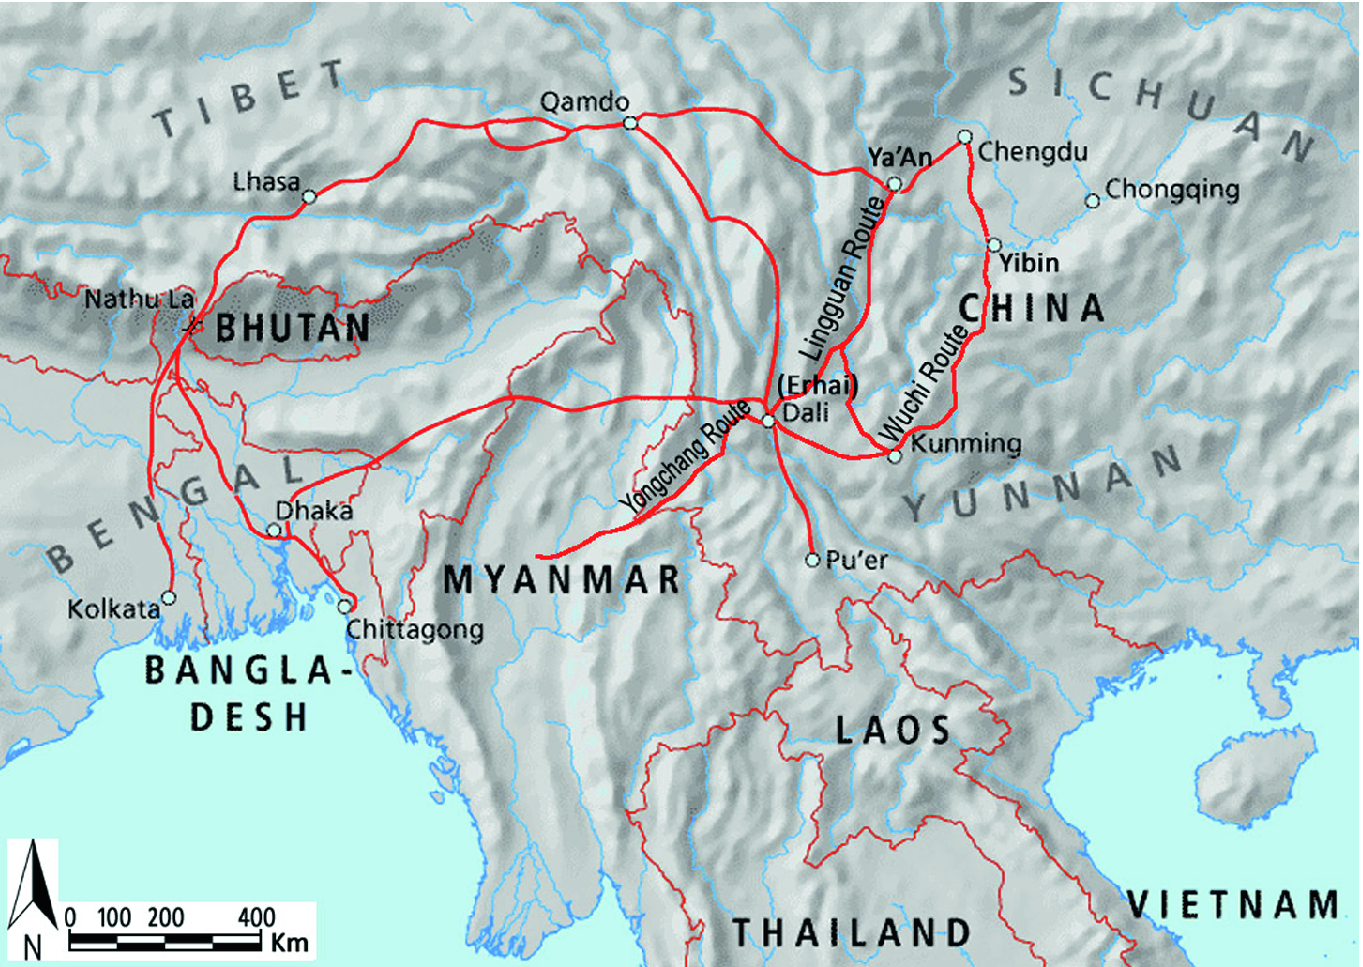 Resilience Of The Human Water System At The Southern Silk